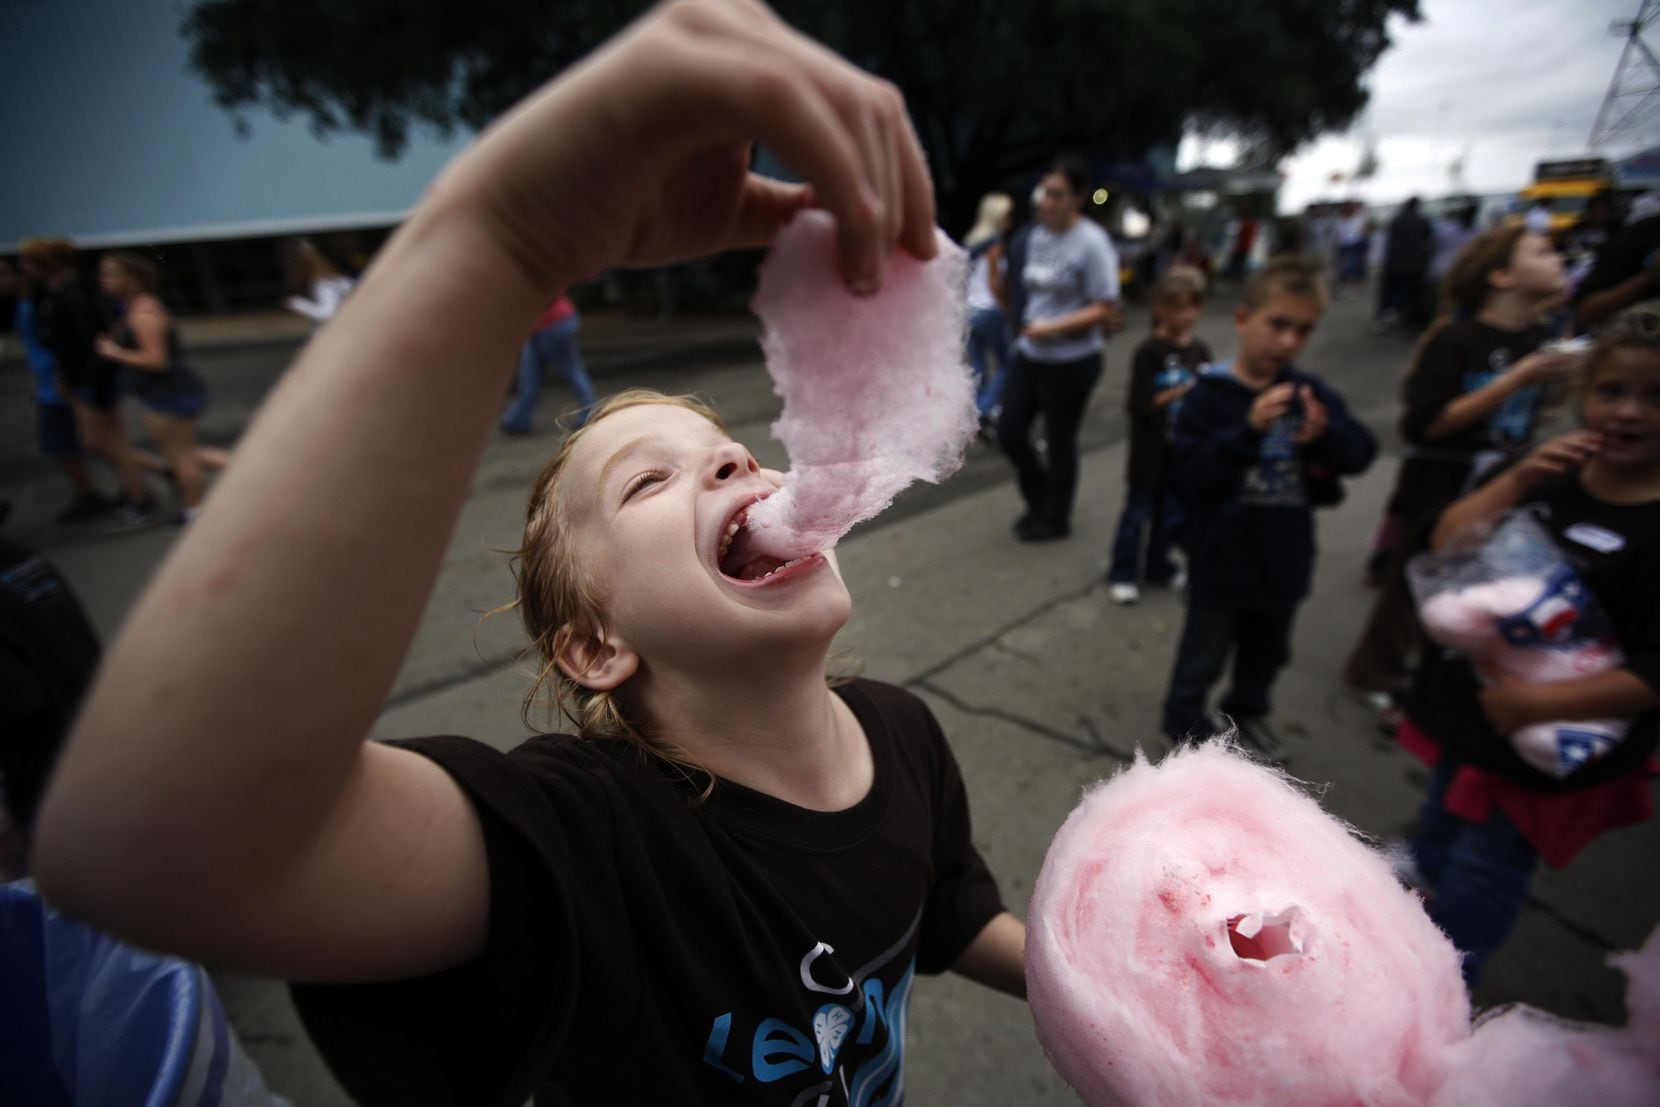 Although the State Fair of Texas won't operate in 2020, a select number of fairgoers can still eat fair food. Here, Presley Lindsay, 7, of Buffalo, Texas, enjoys cotton candy at the State Fair of Texas in 2009. The State Fair of Texas has been in operation for 134 years.